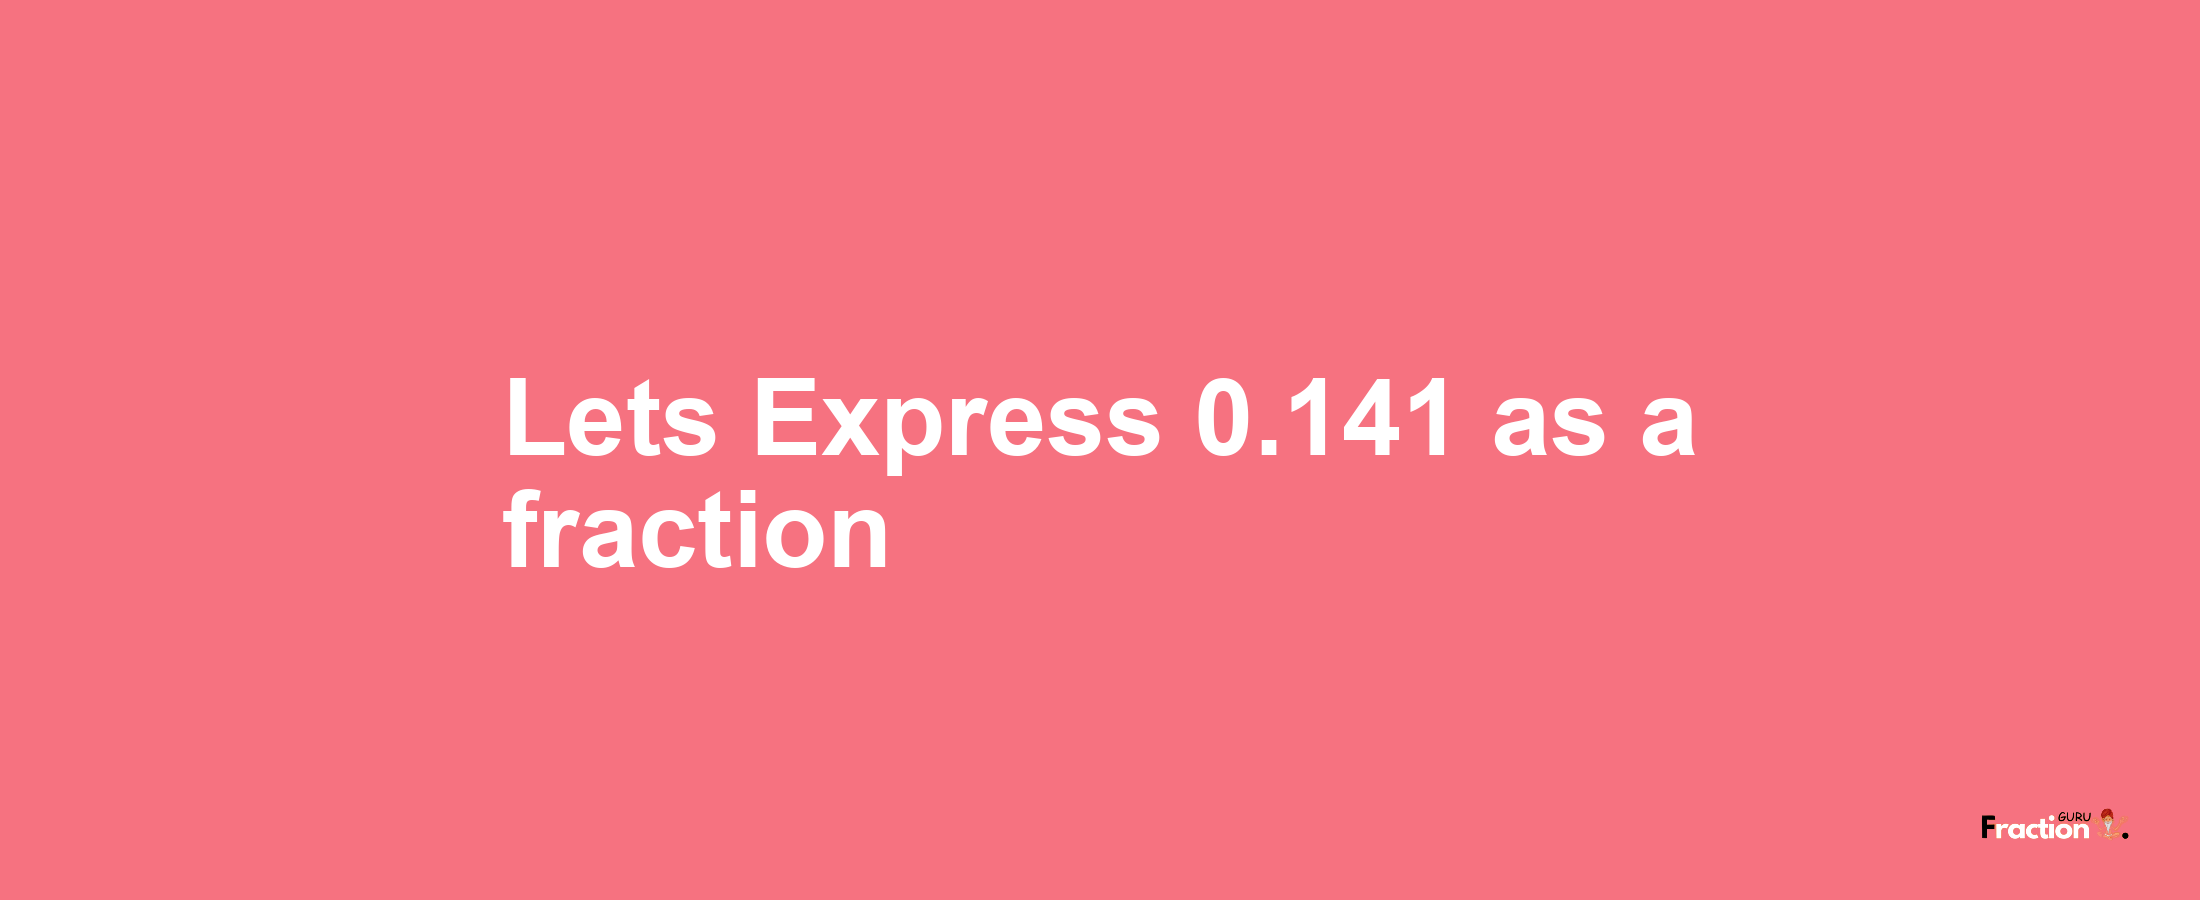 Lets Express 0.141 as afraction